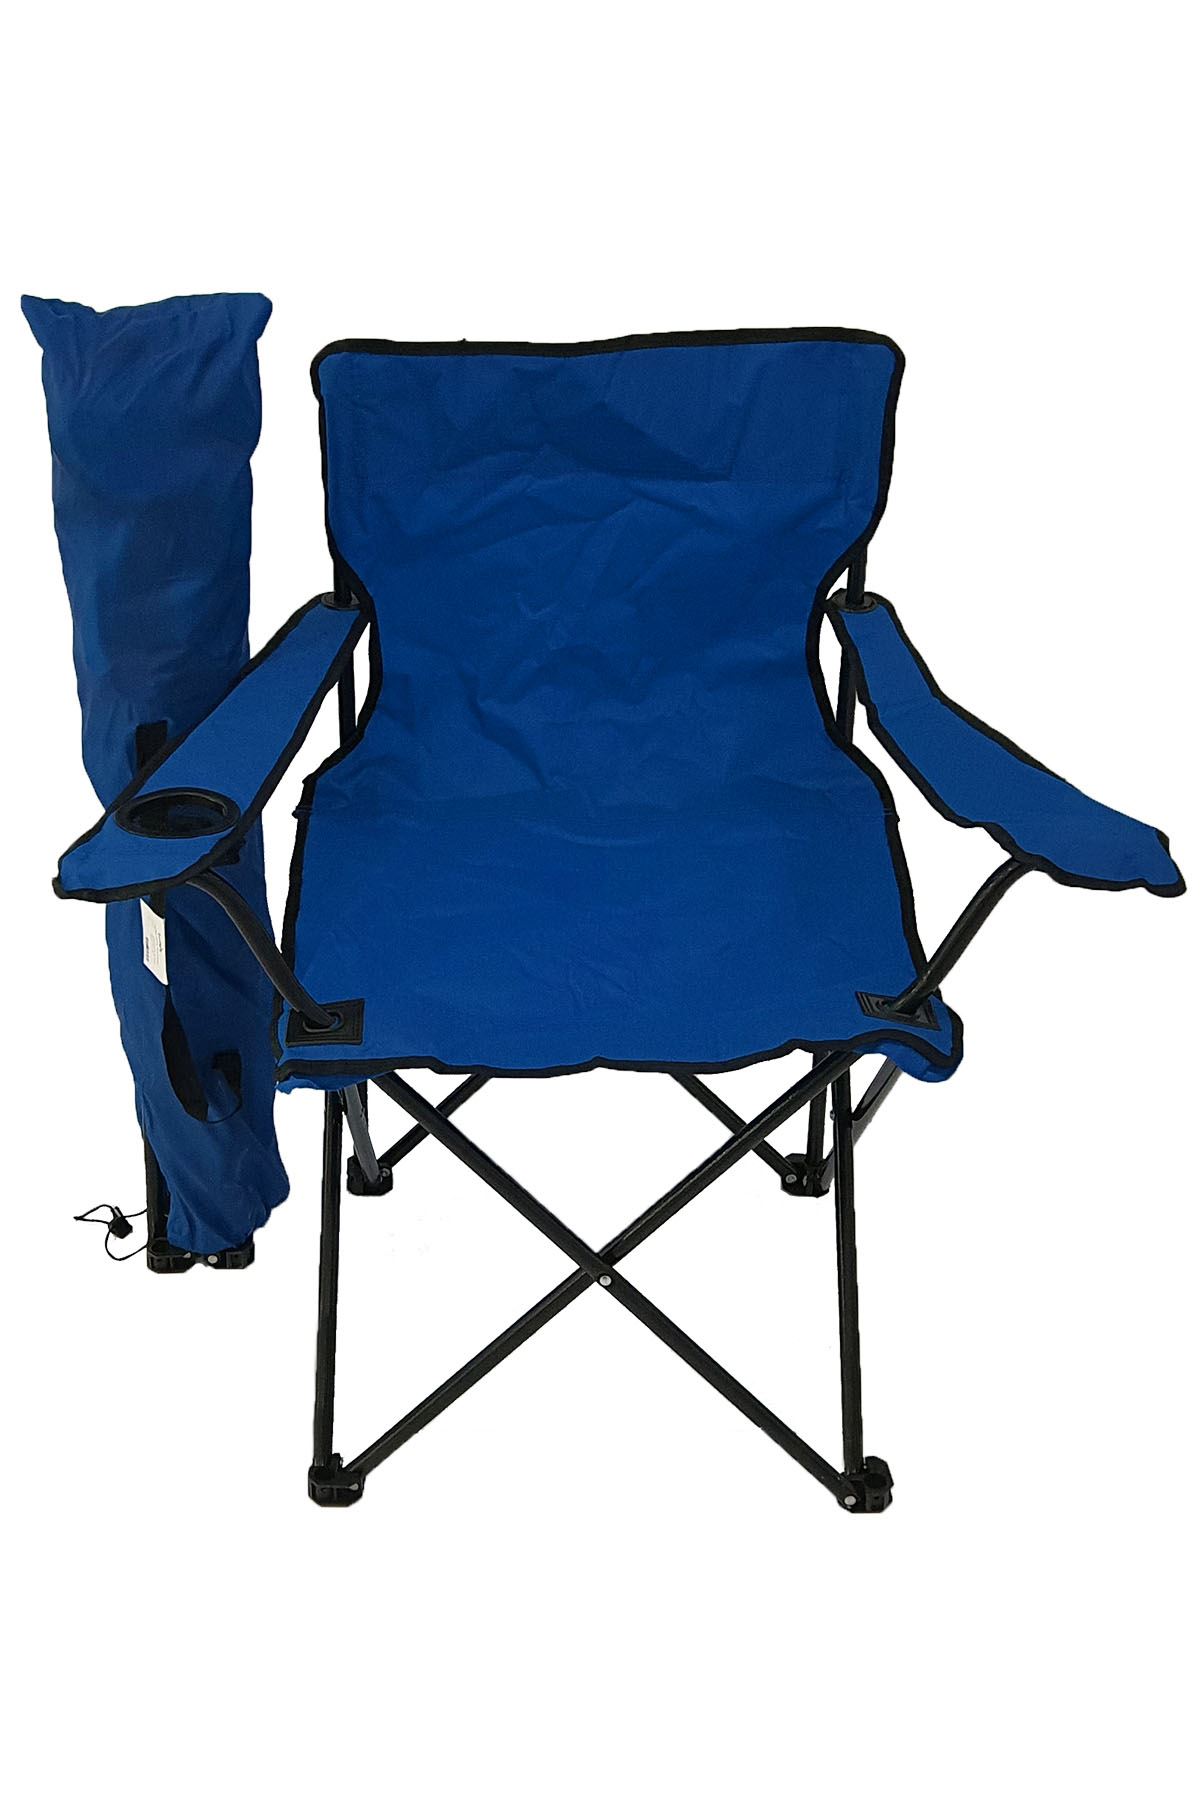 Bofigo Camping Chair Picnic Chair Folding Chair Camping Chair With Carrying Bag Blue